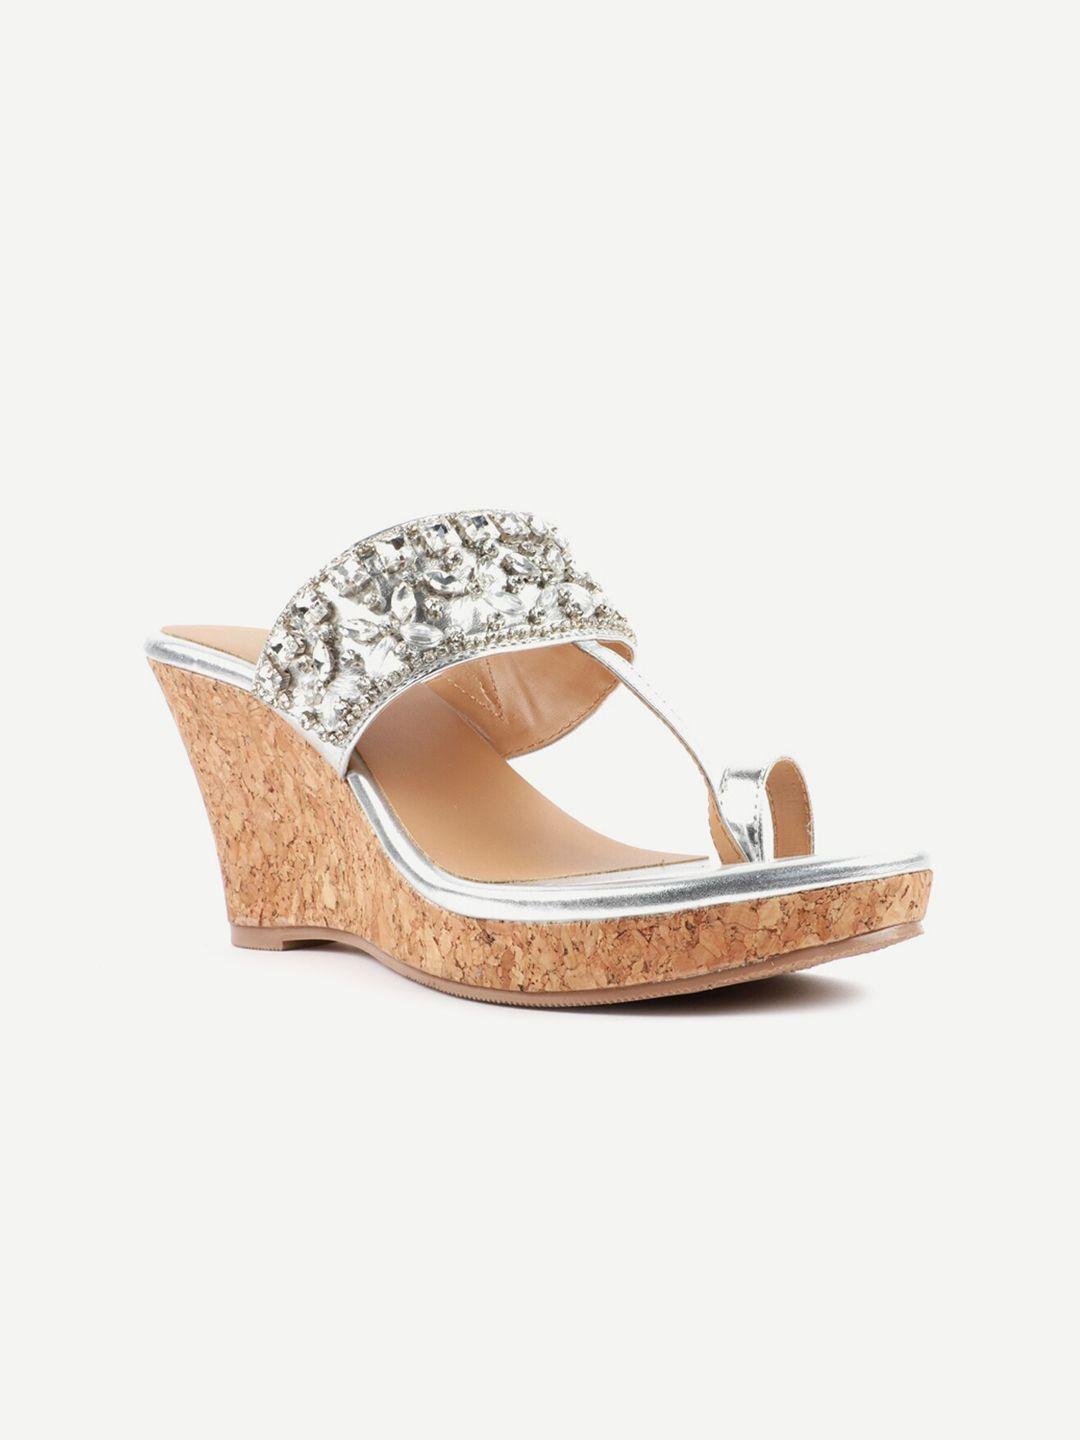 carlton-london-silver-toned-wedge-sandals-with-laser-cuts